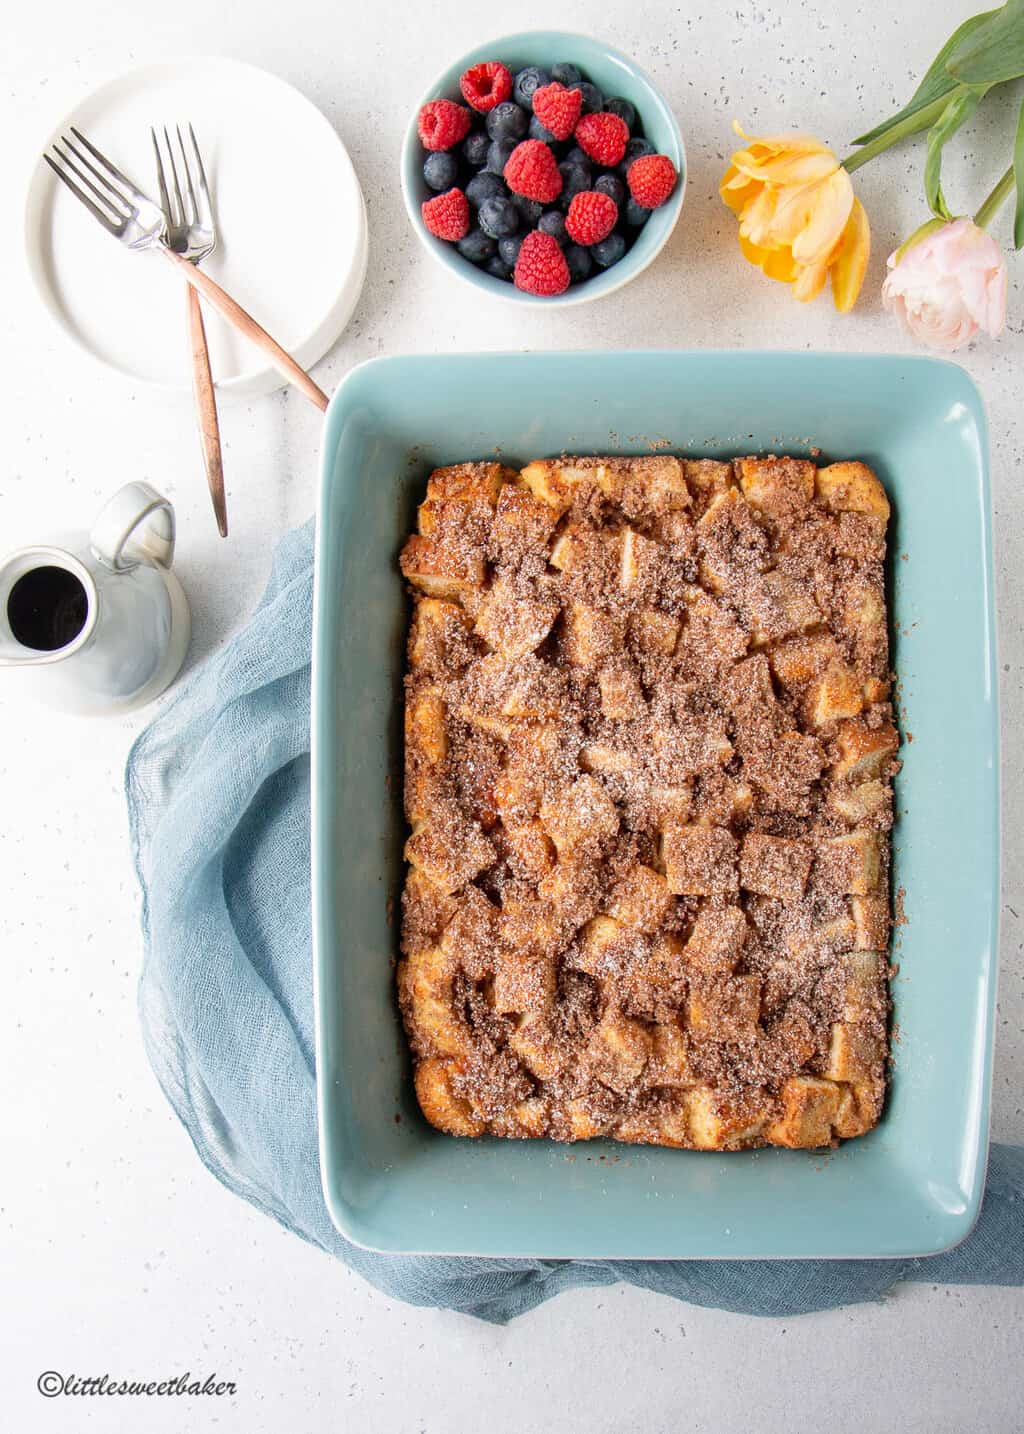 A whole french toast casserole on a light blue baking dish.